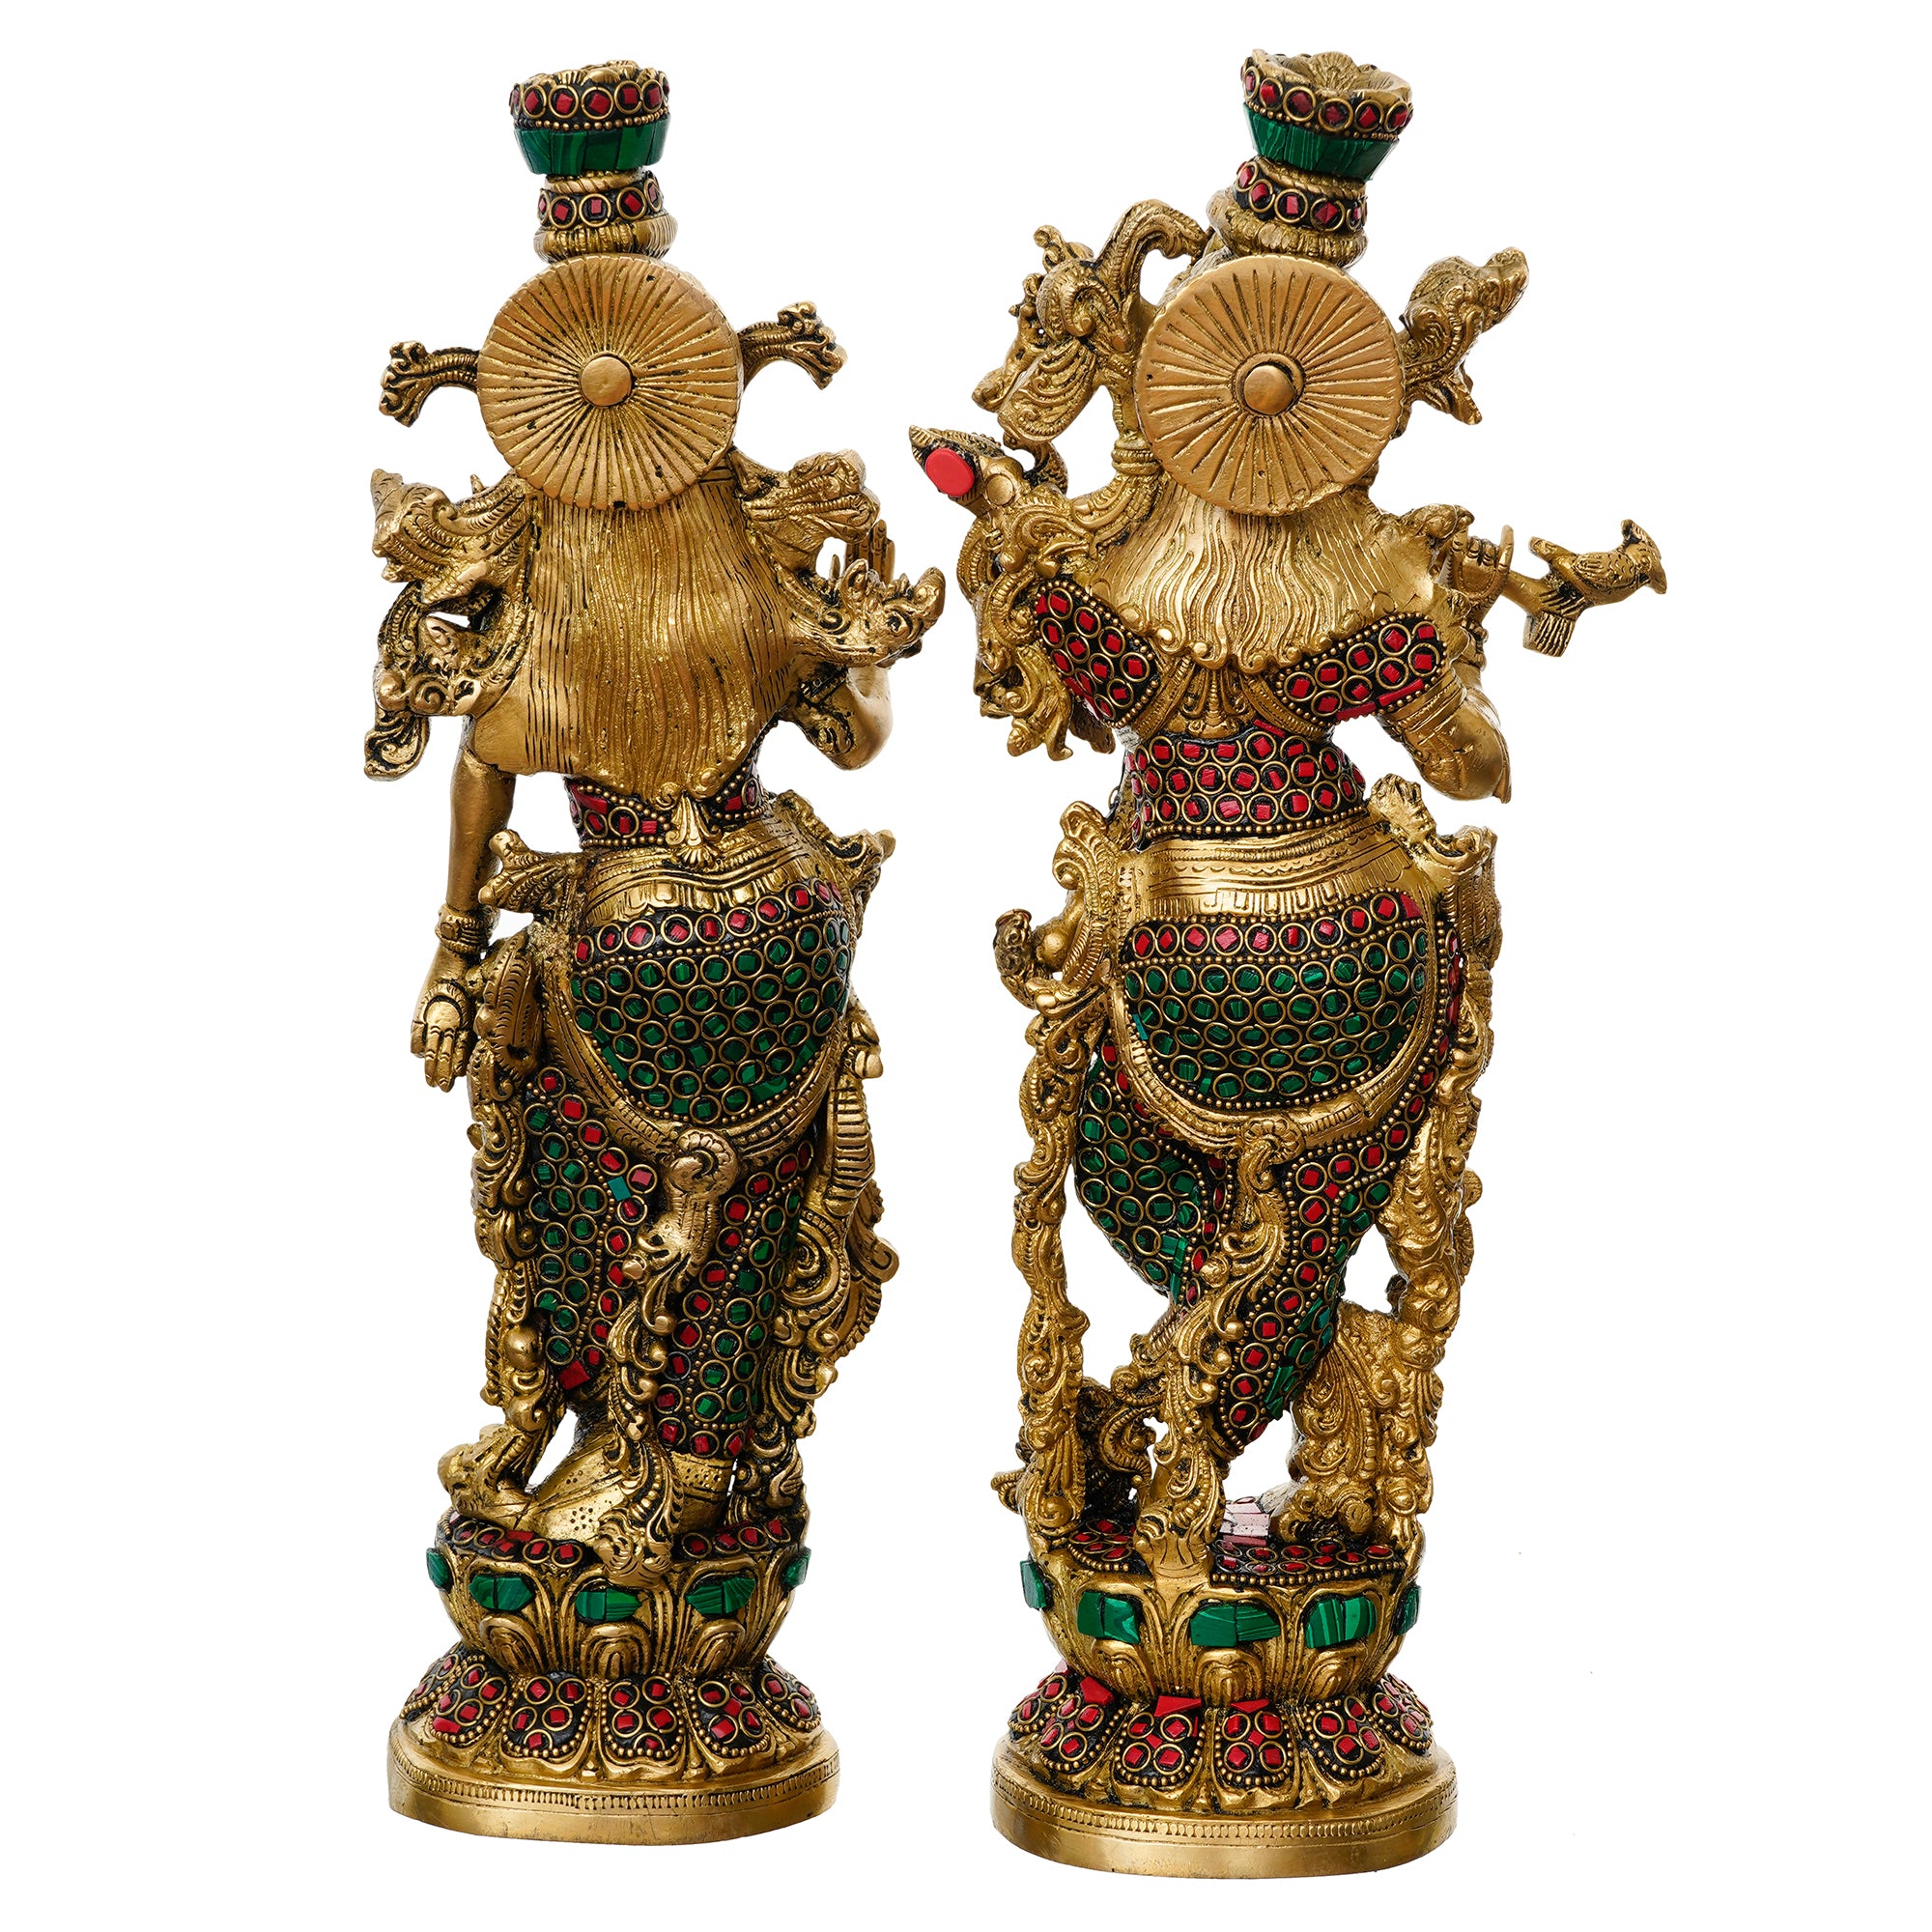 Golden Radha Krishna Playing Flute Handcrafted Brass Idol with Colorful Stone Work 6